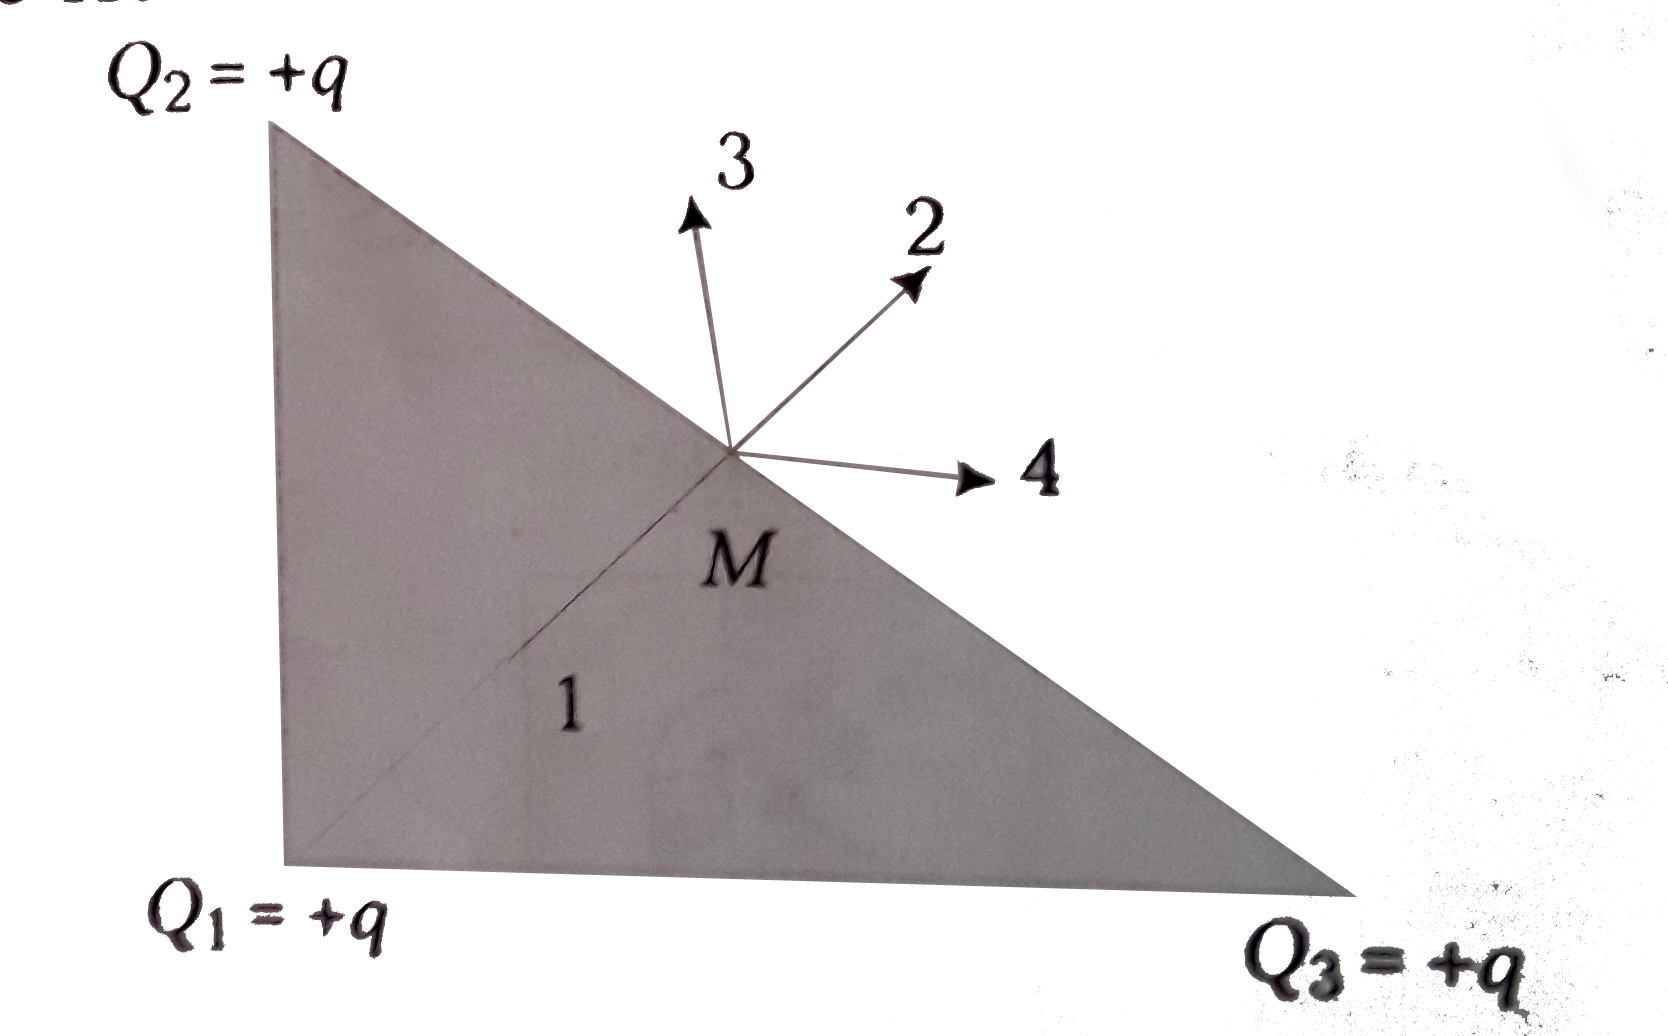 Three point charges as shown are placed at the vertices of an isosceles right angled triangle. Which of the numbered vector coincides in direction with the electric field at the mid-point M of the hypotenuse?